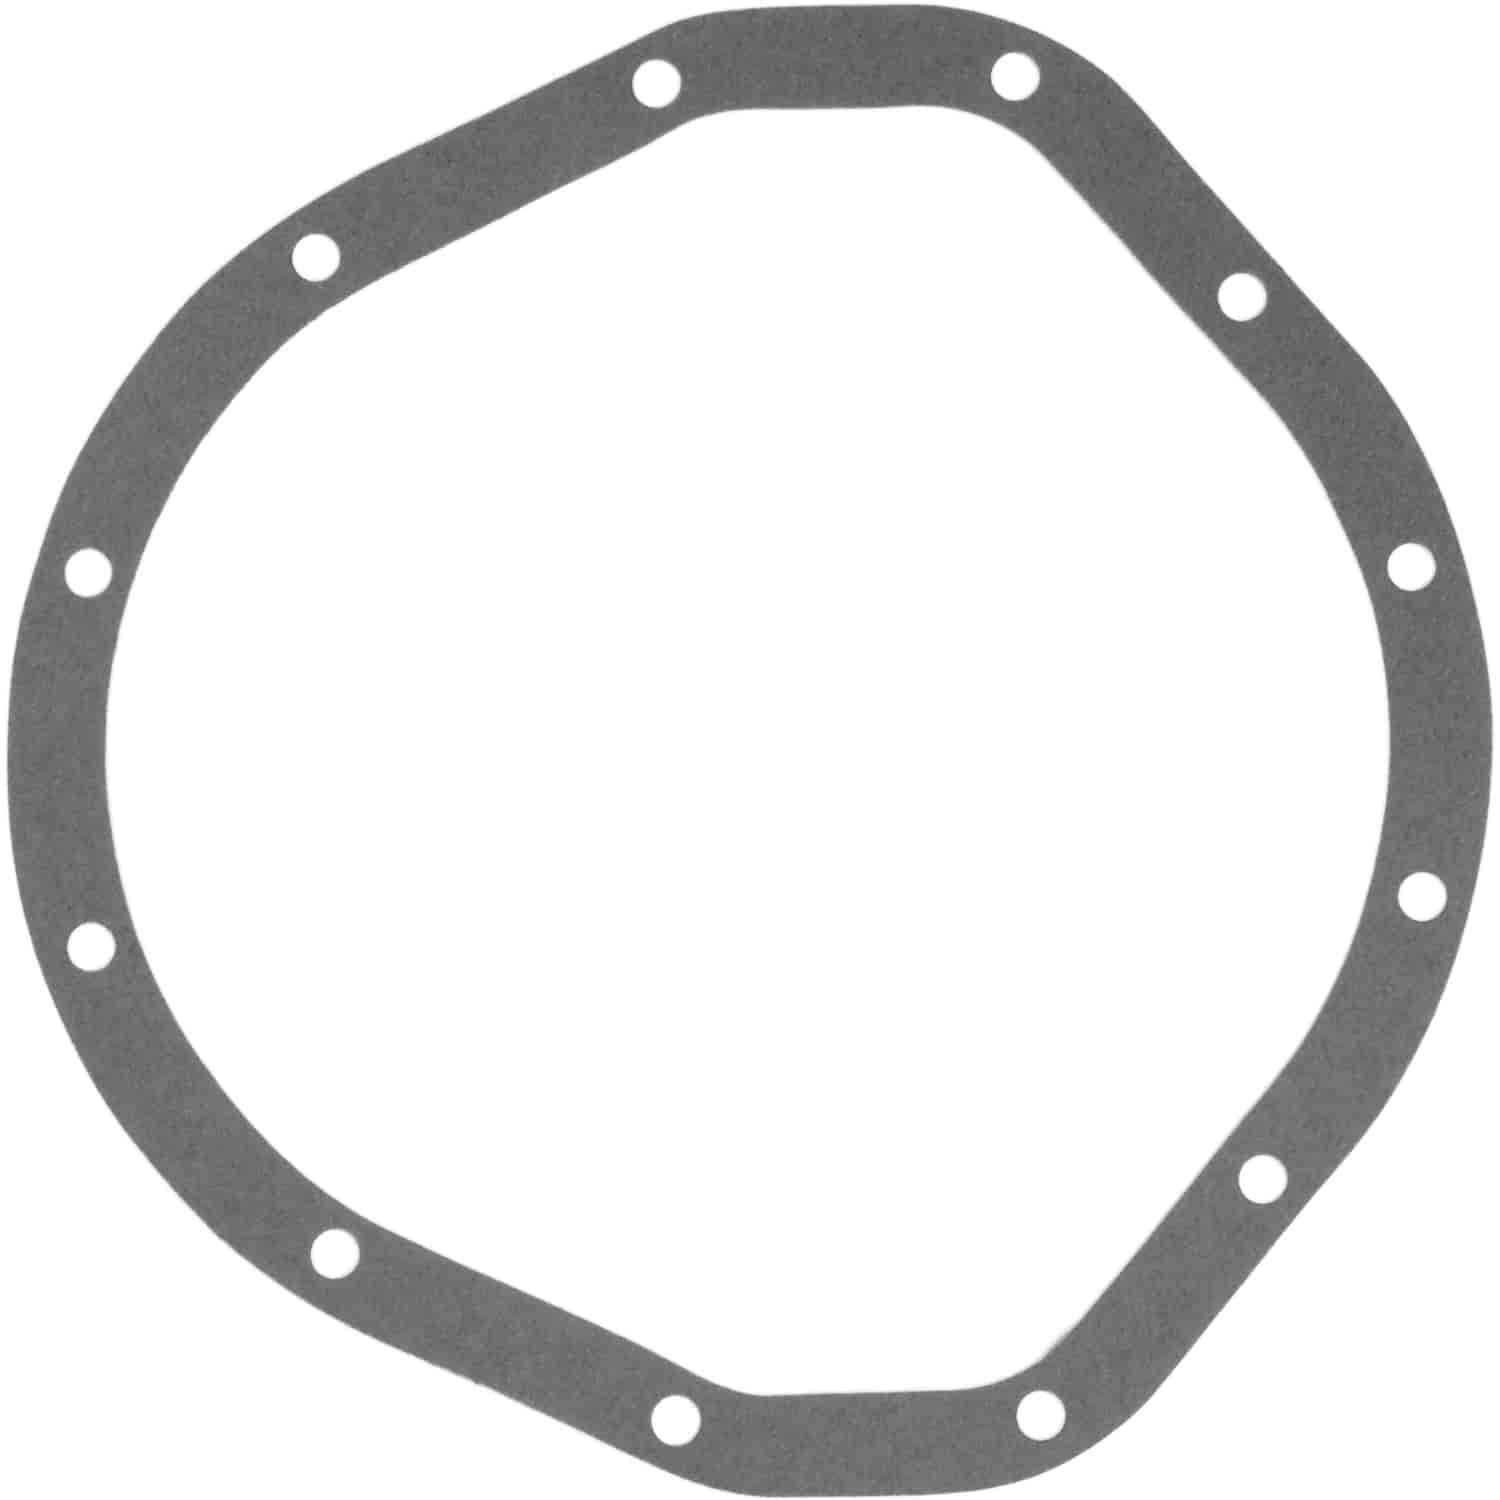 Differential Cover Gasket GM 12-Bolt Truck